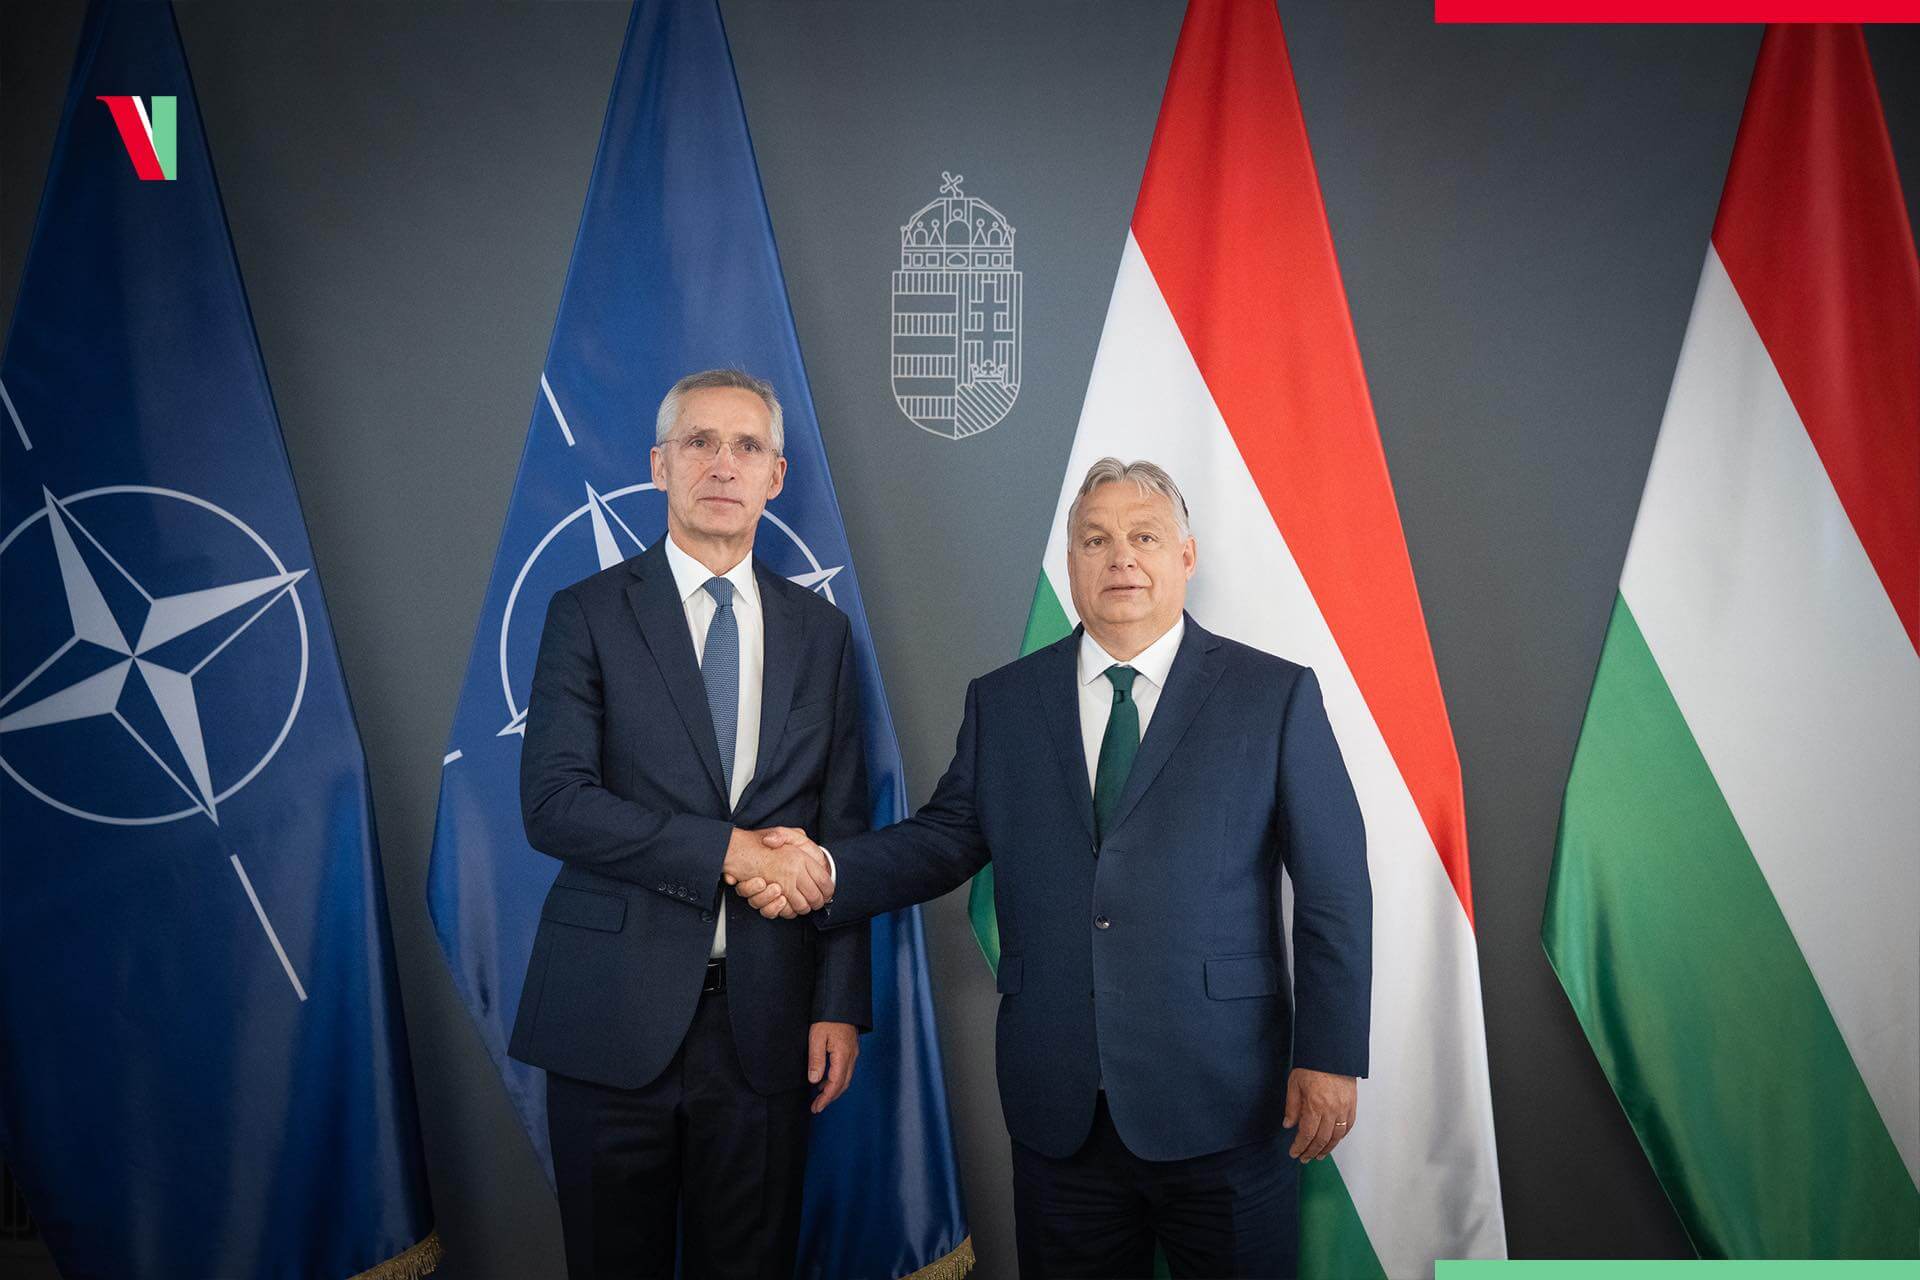 Watch: NATO Accepts Hungary's Non-Participation in Ukraine Operations